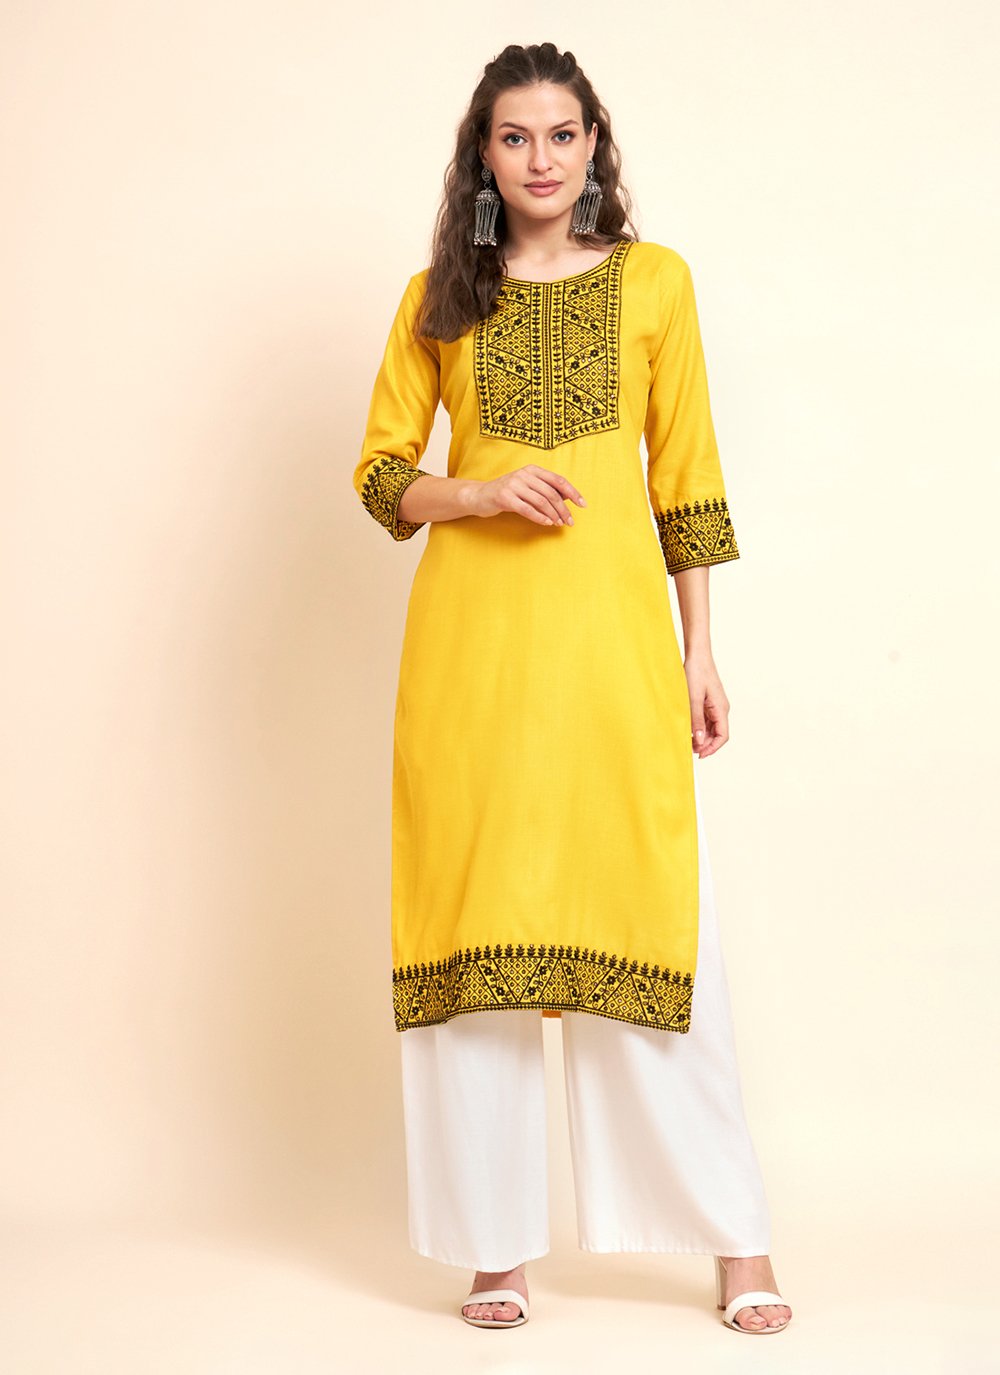 Buy Jagdamba Online Store Women's Rayon Solid Embroidered Mirror Work Long  Flared Kurti (Yellow, 2XL) at Amazon.in